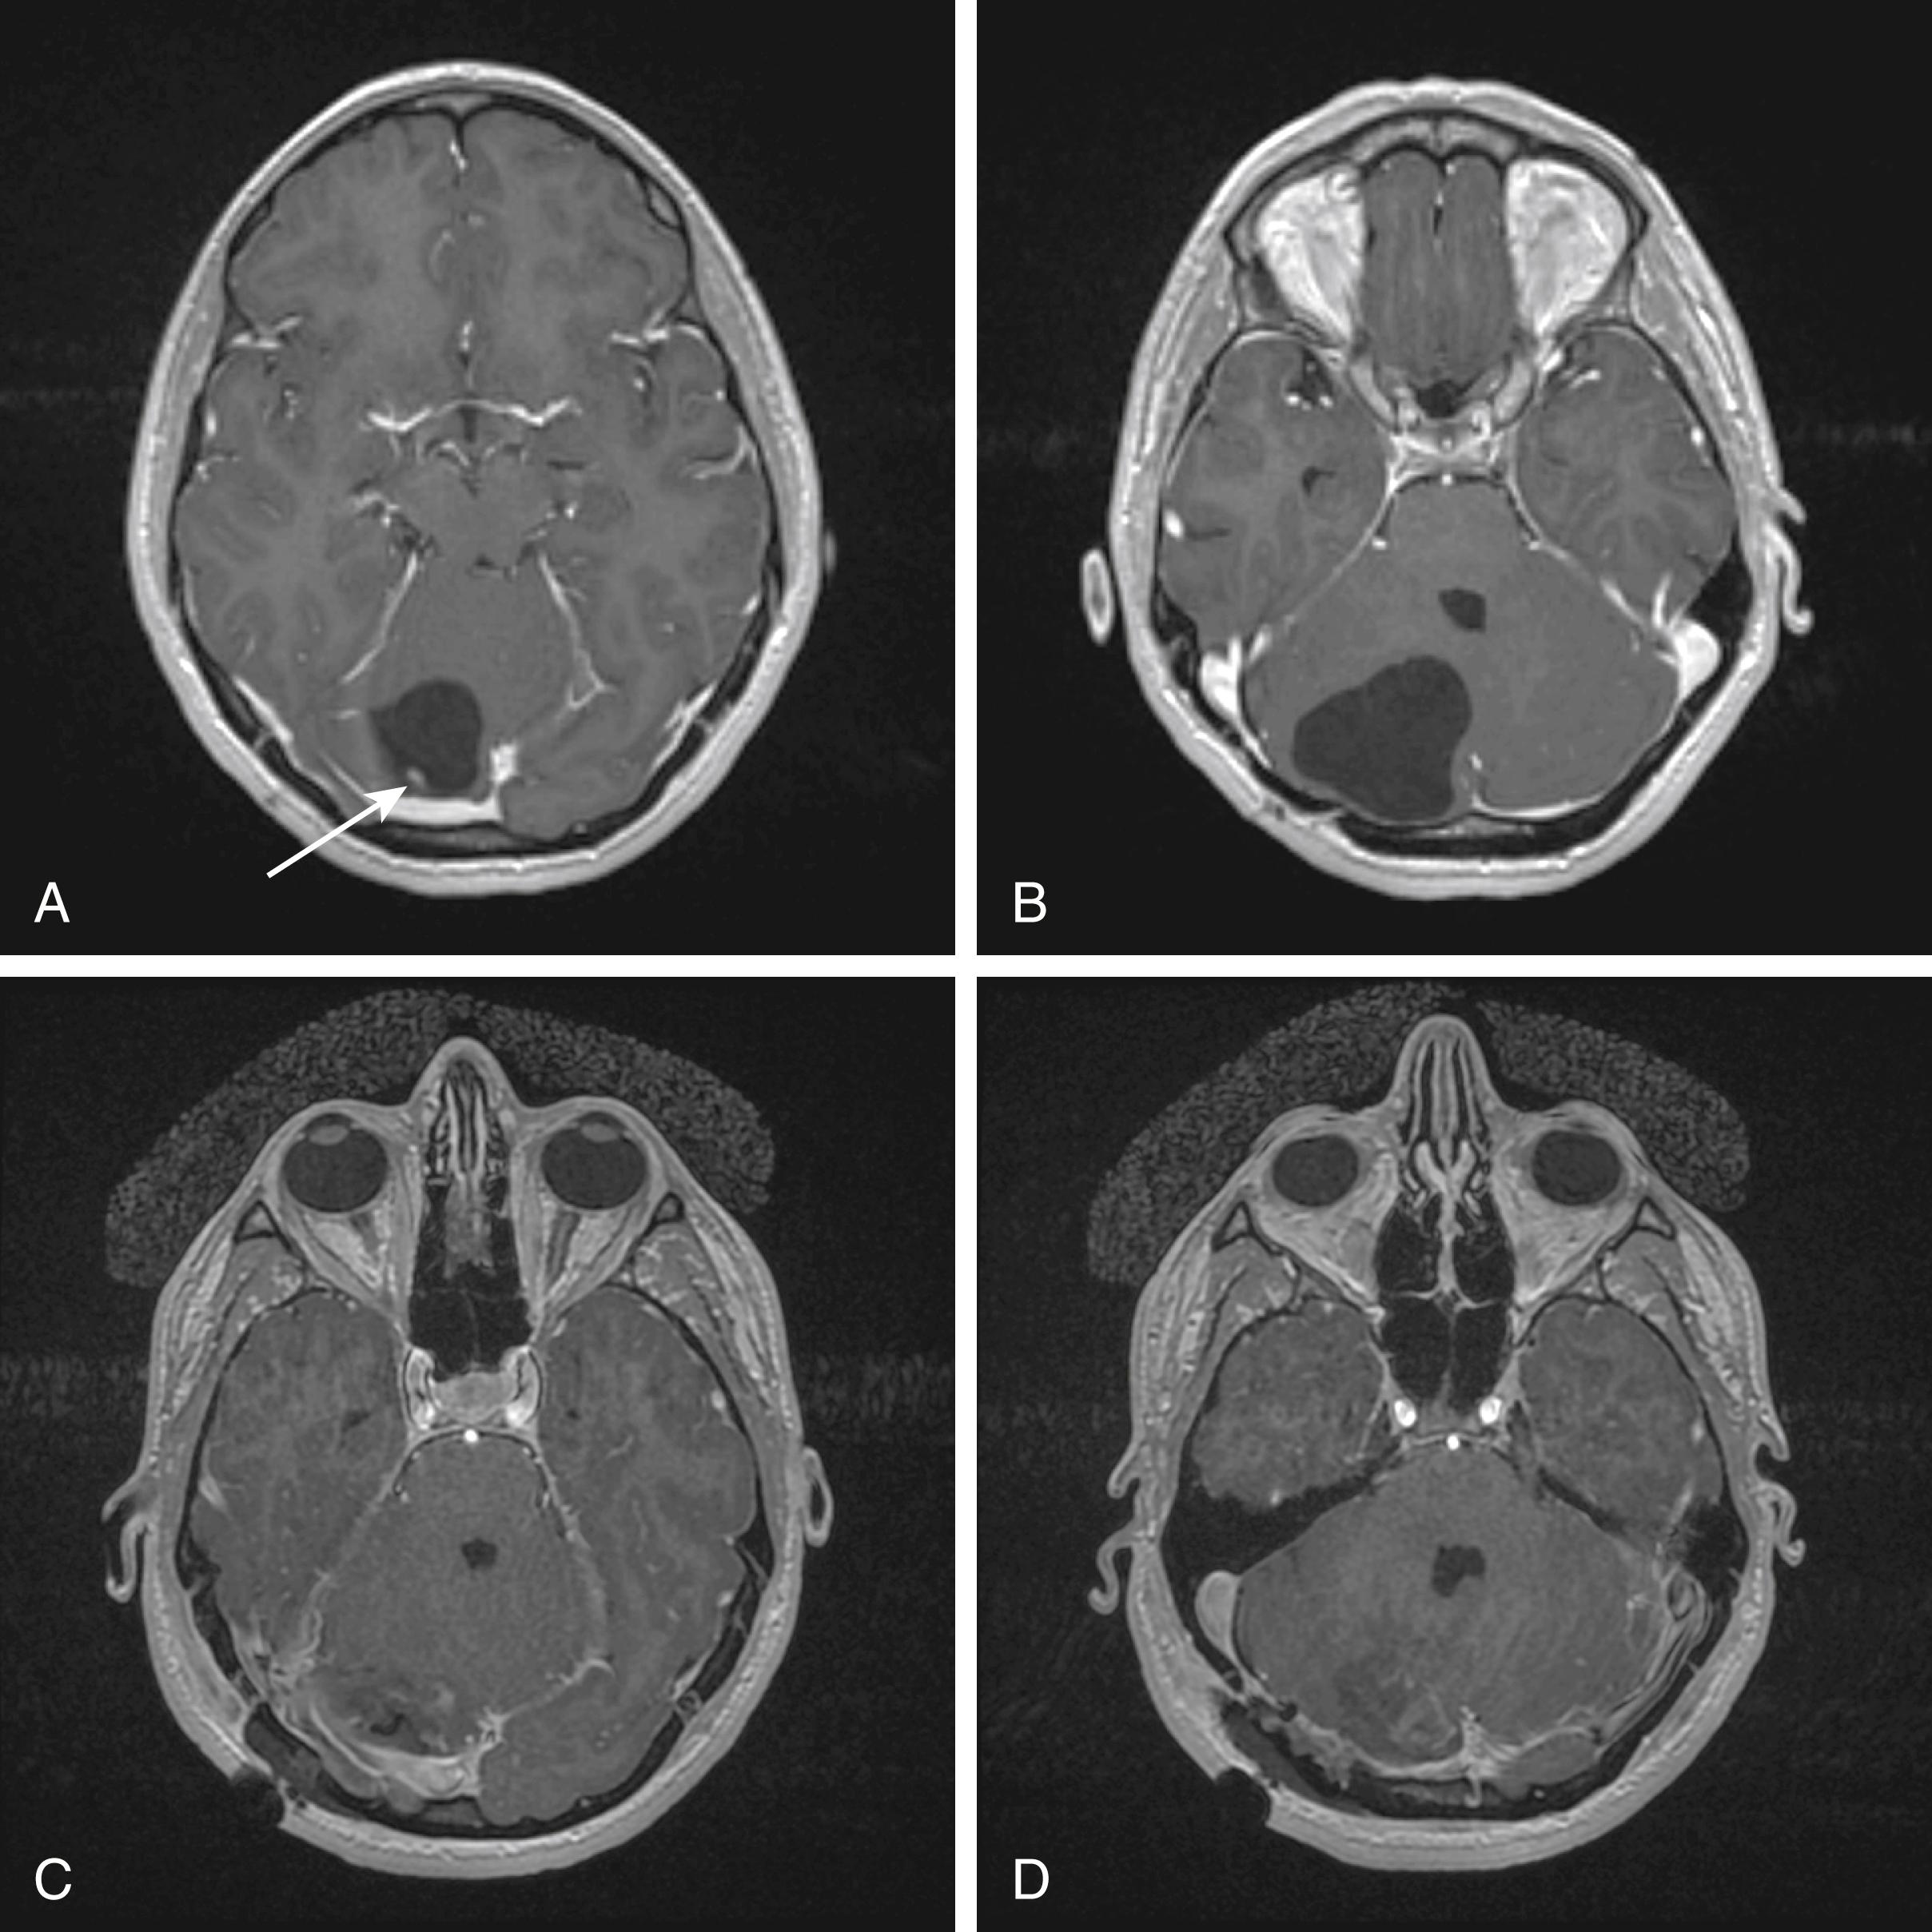 FIGURE 10.1, Hemangioblastoma. (A) T1 magnetic resonance imaging (MRI) with gadolinium shows a hypointense cerebellar lesion with a small enhancing mural nodule (arrow) . (B) The lesion is primarily cystic, with minimal fourth ventricular effacement. (C and D) Postoperative T1-weighted gadolinium-enhanced MRI demonstrates gross total resection, including resection of the mural nodule.